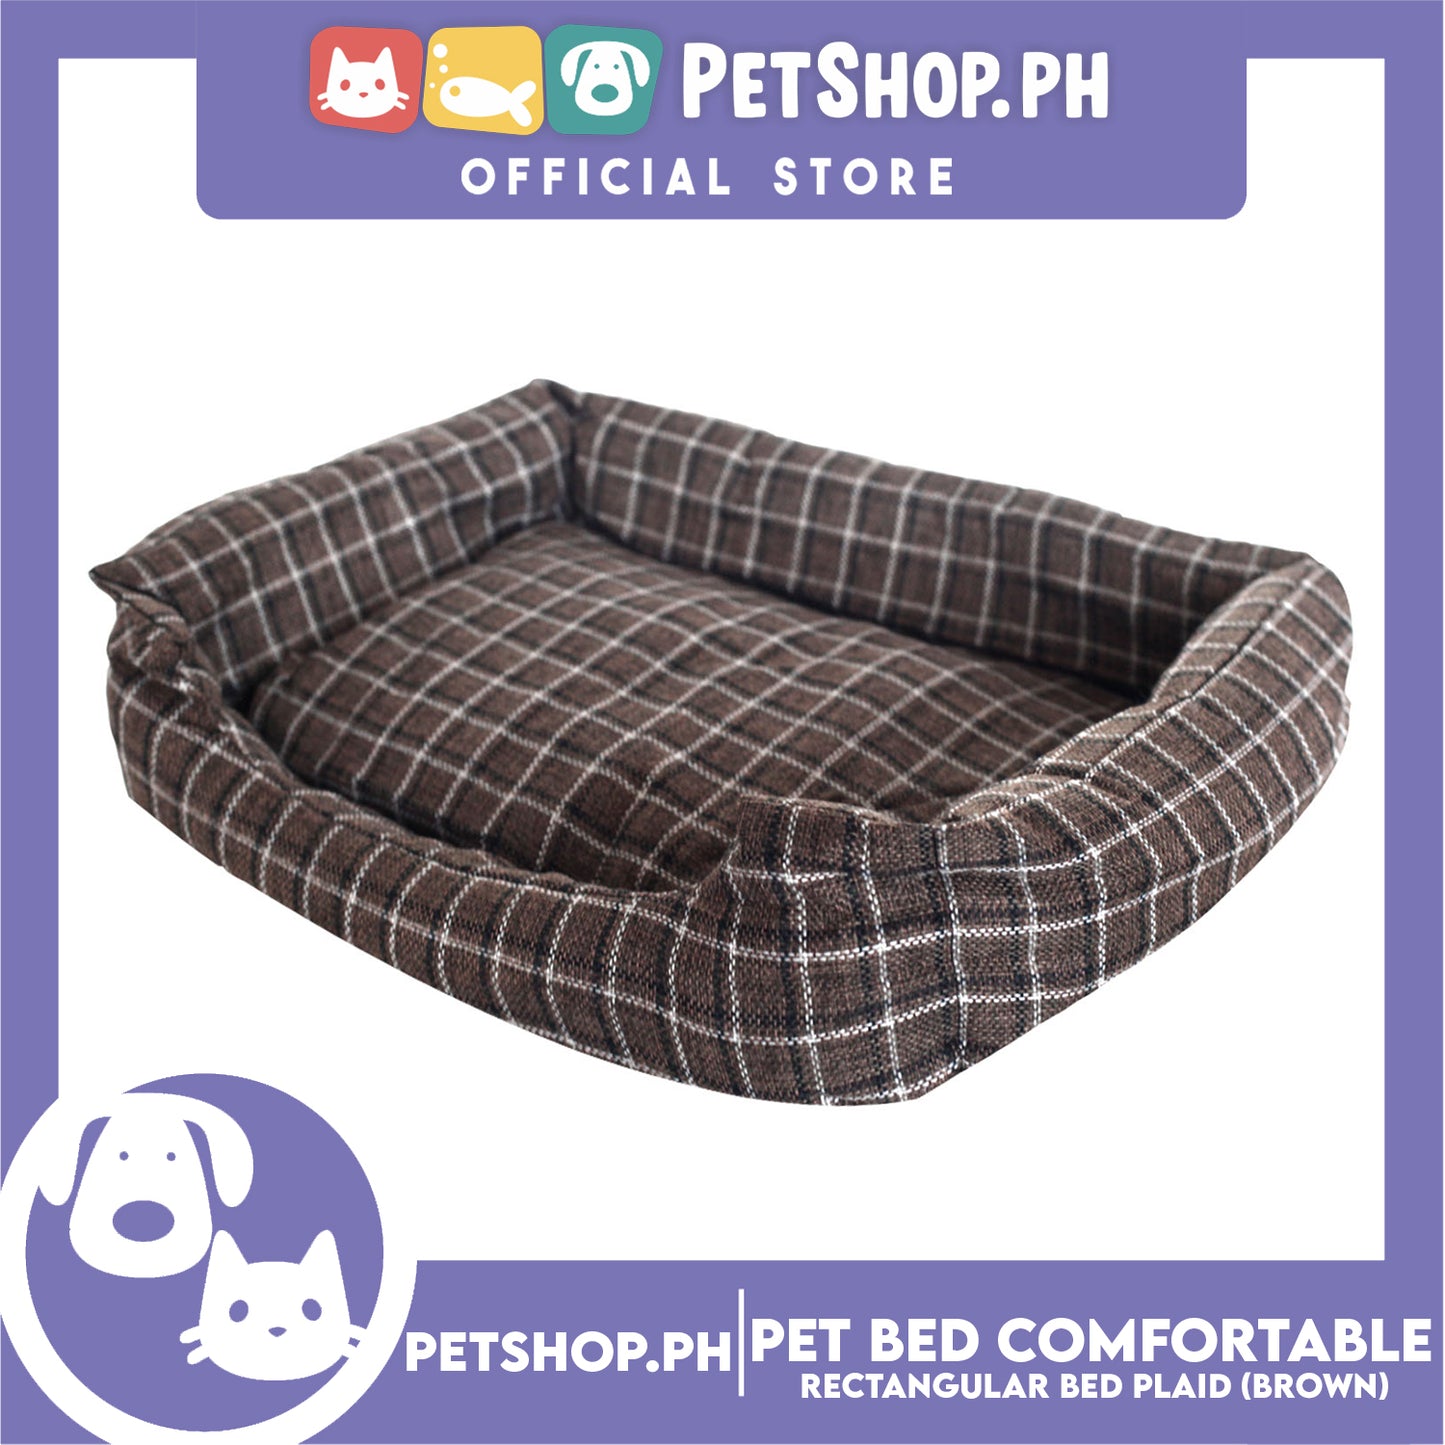 Pet Bed Comfortable Rectangular Pet Bed Plaid Design 63x50x10cm Large for Dogs & Cats (Brown)